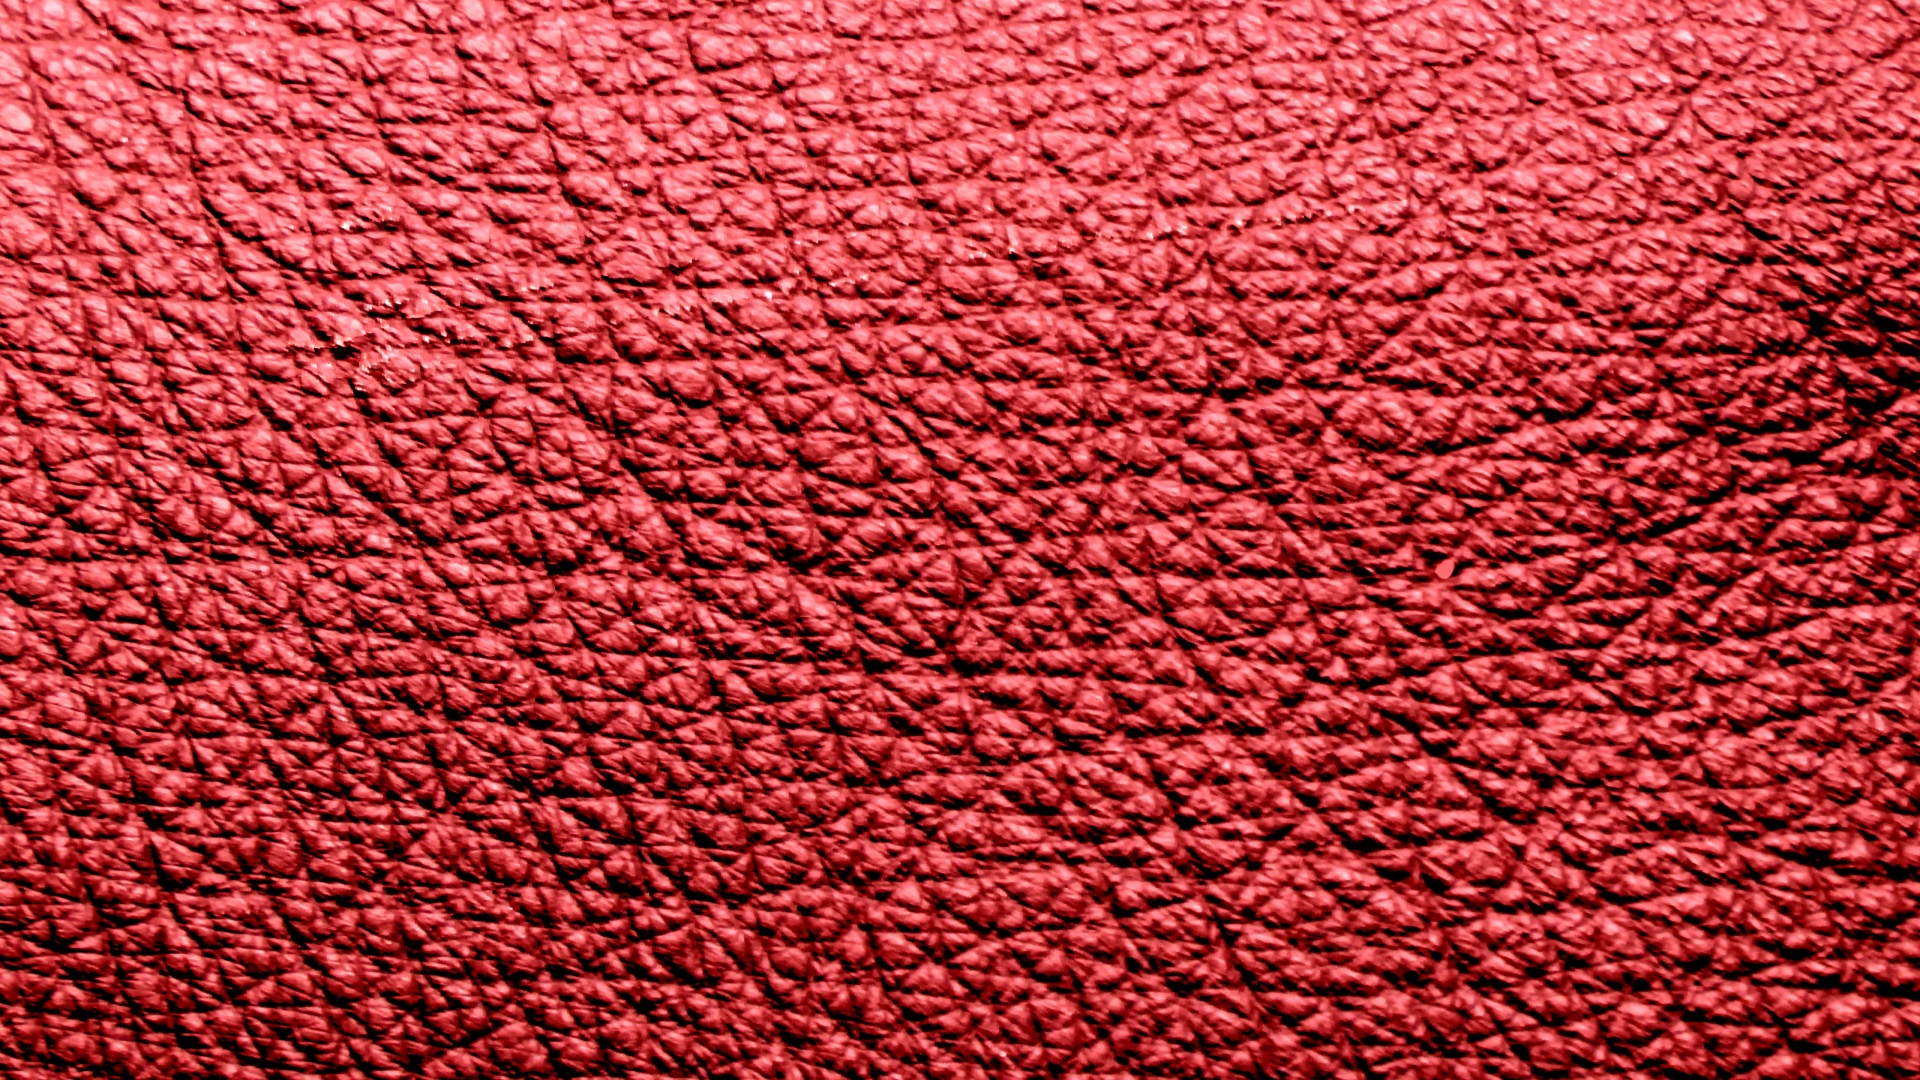 Red Crevice Pattern Background